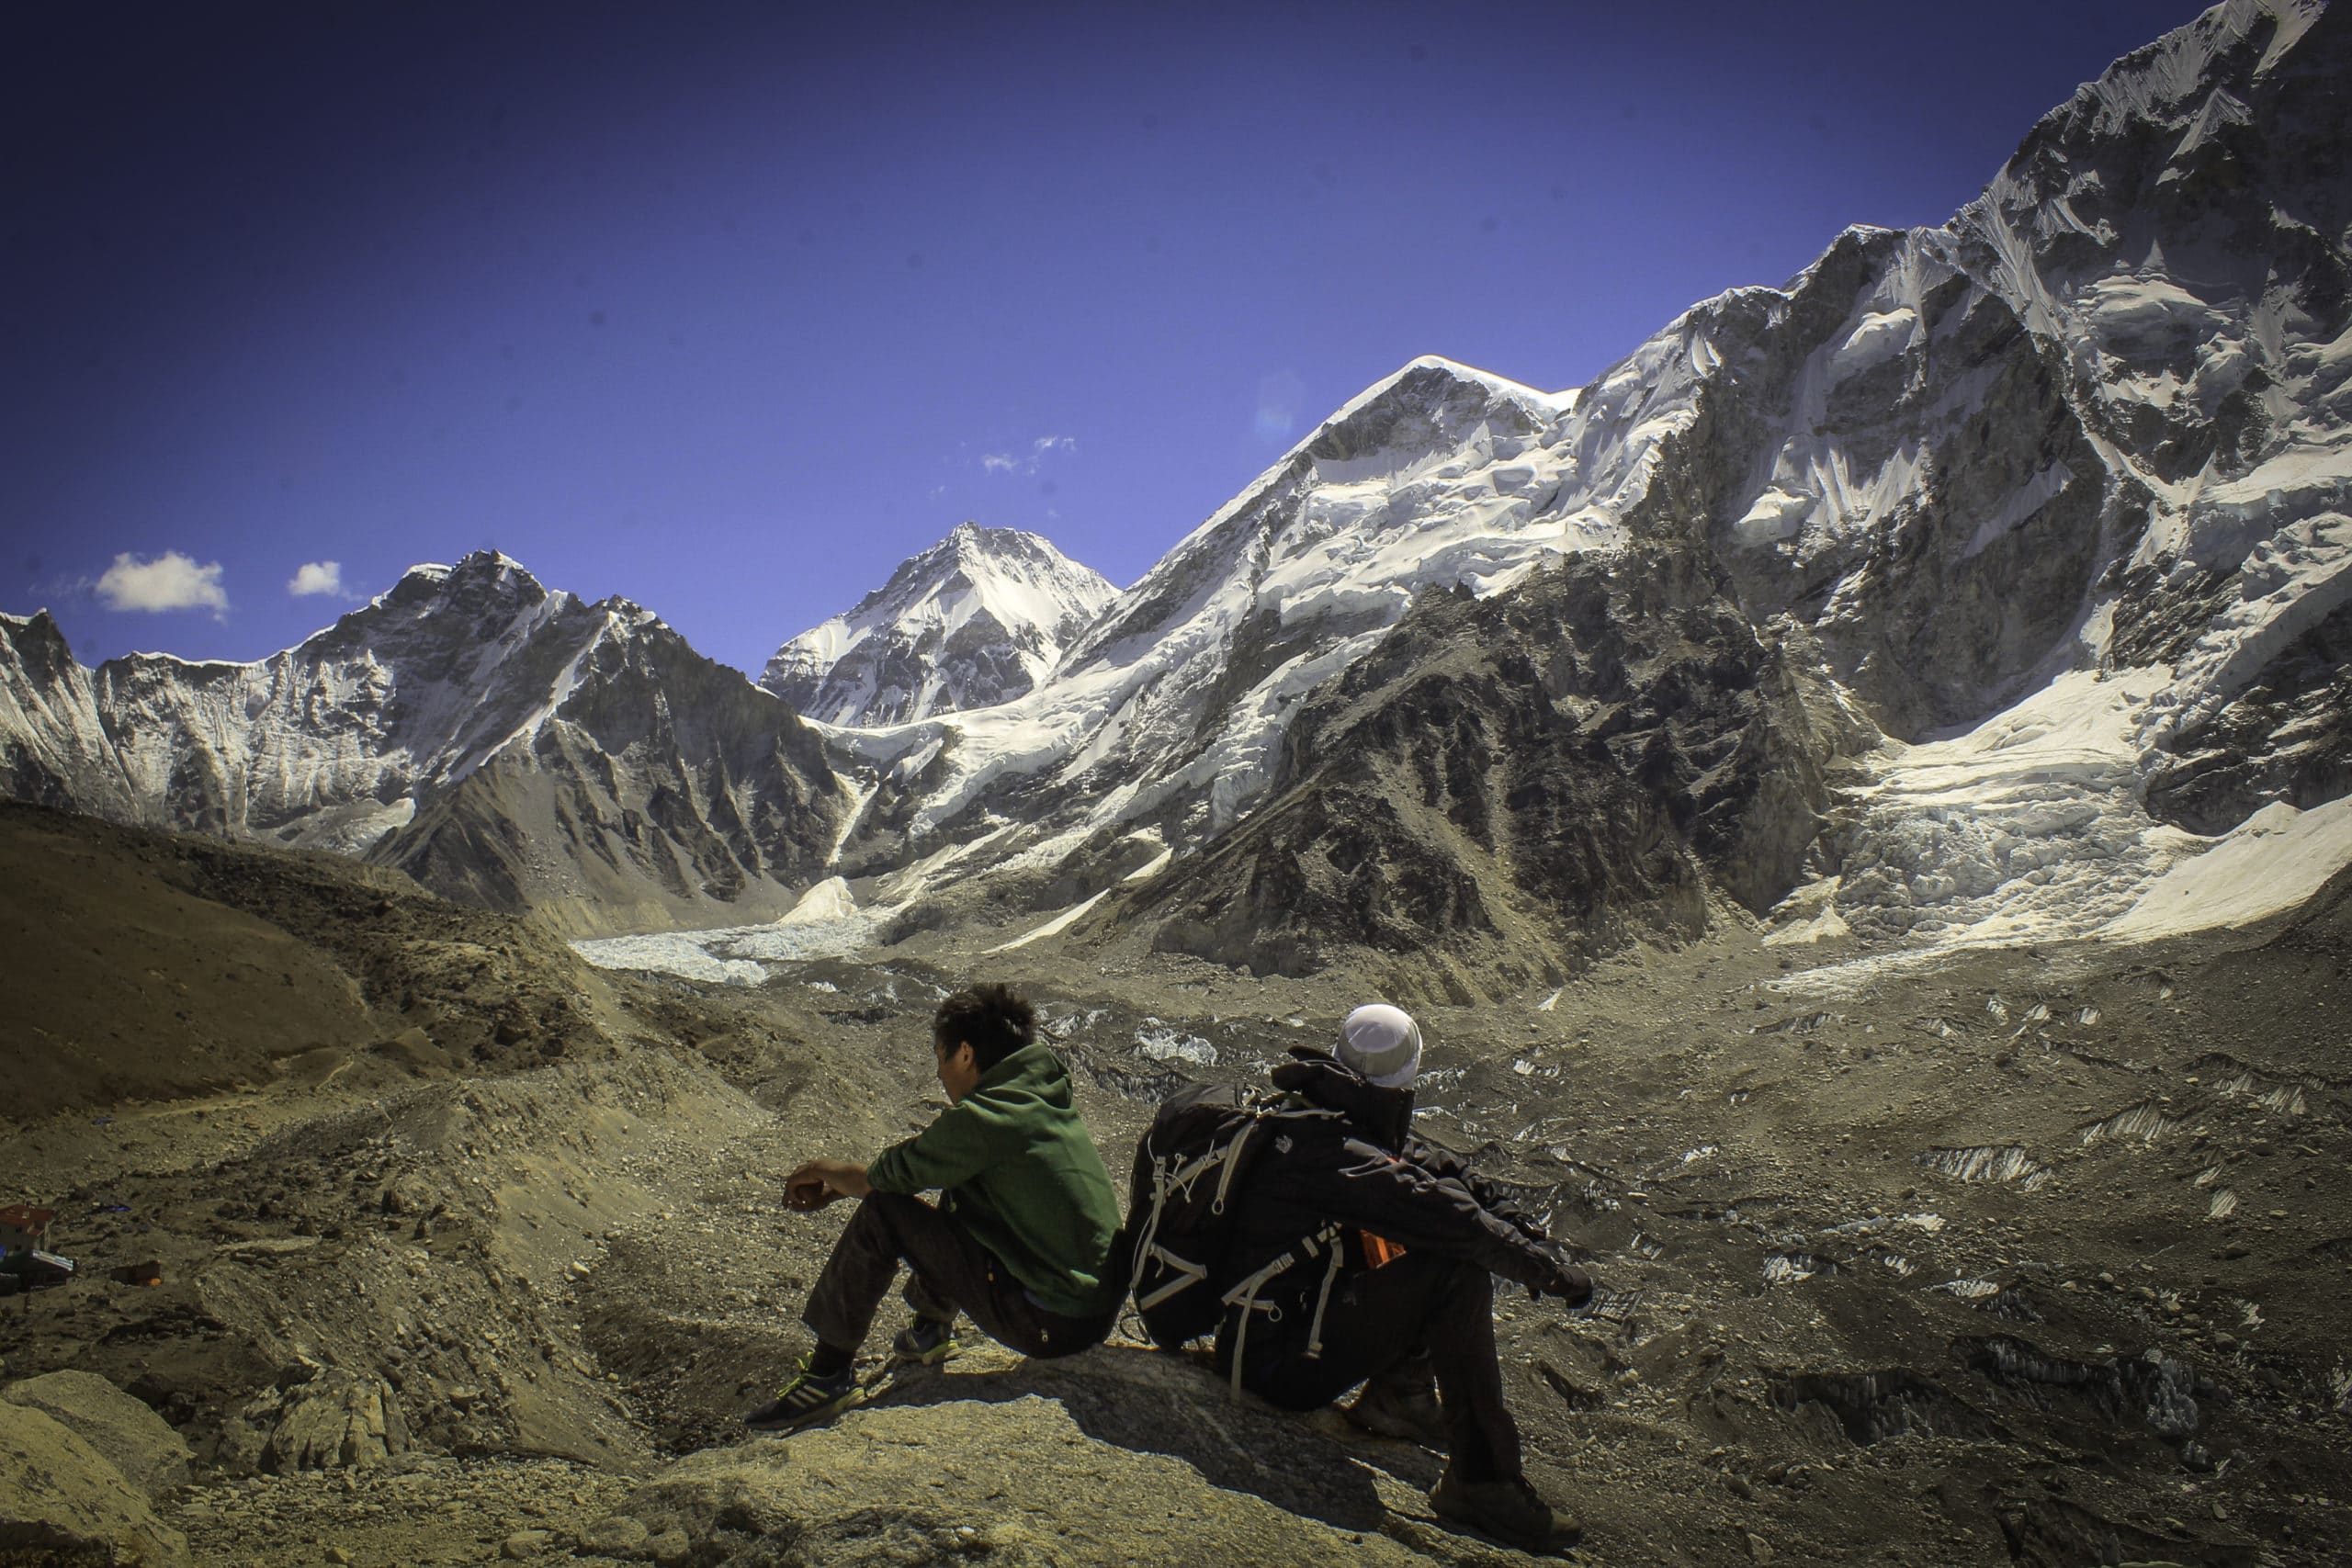 The journey into Everest base camp